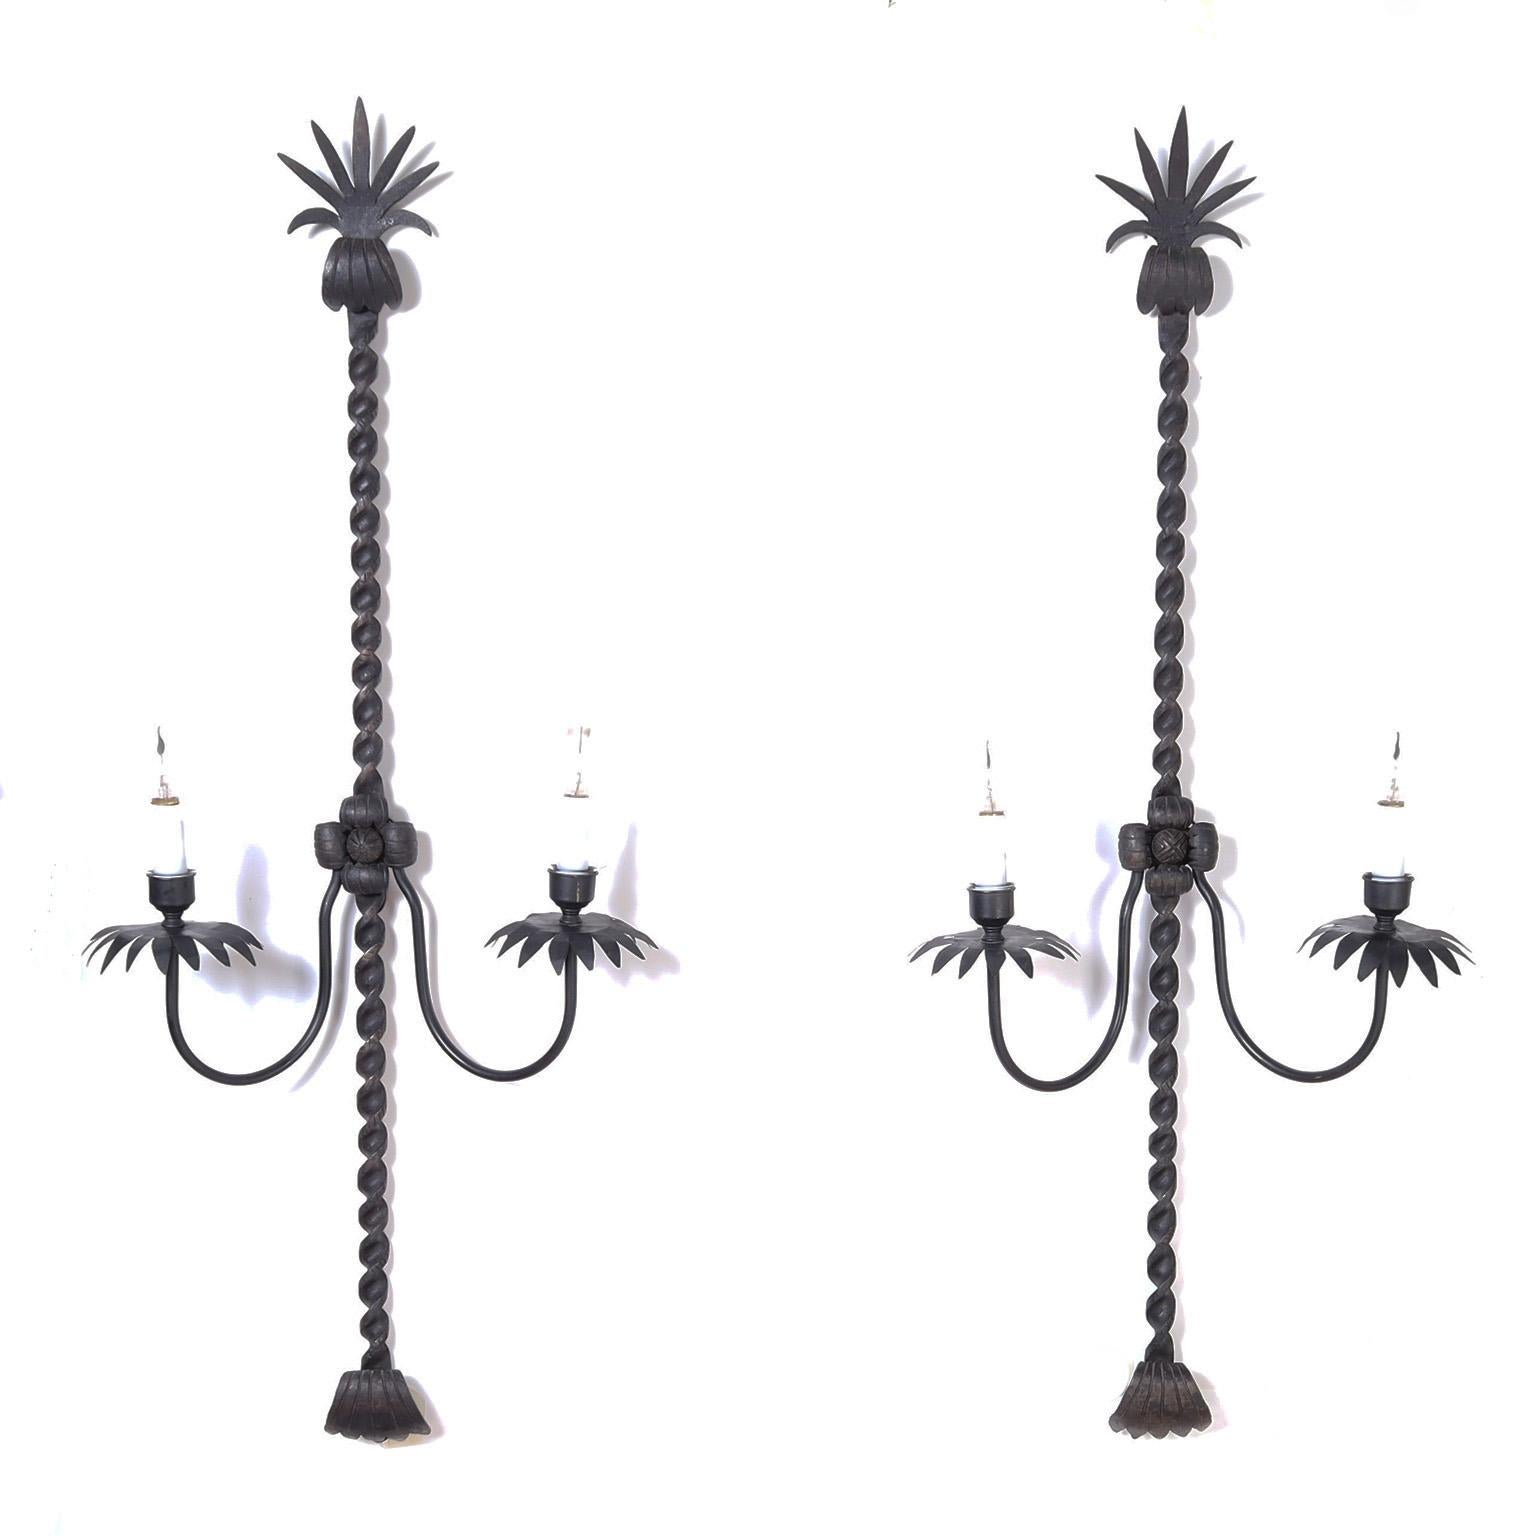 Tall and handsome two light French iron wall sconces, hand wrought, twisted, hammered and ready for the chateau.